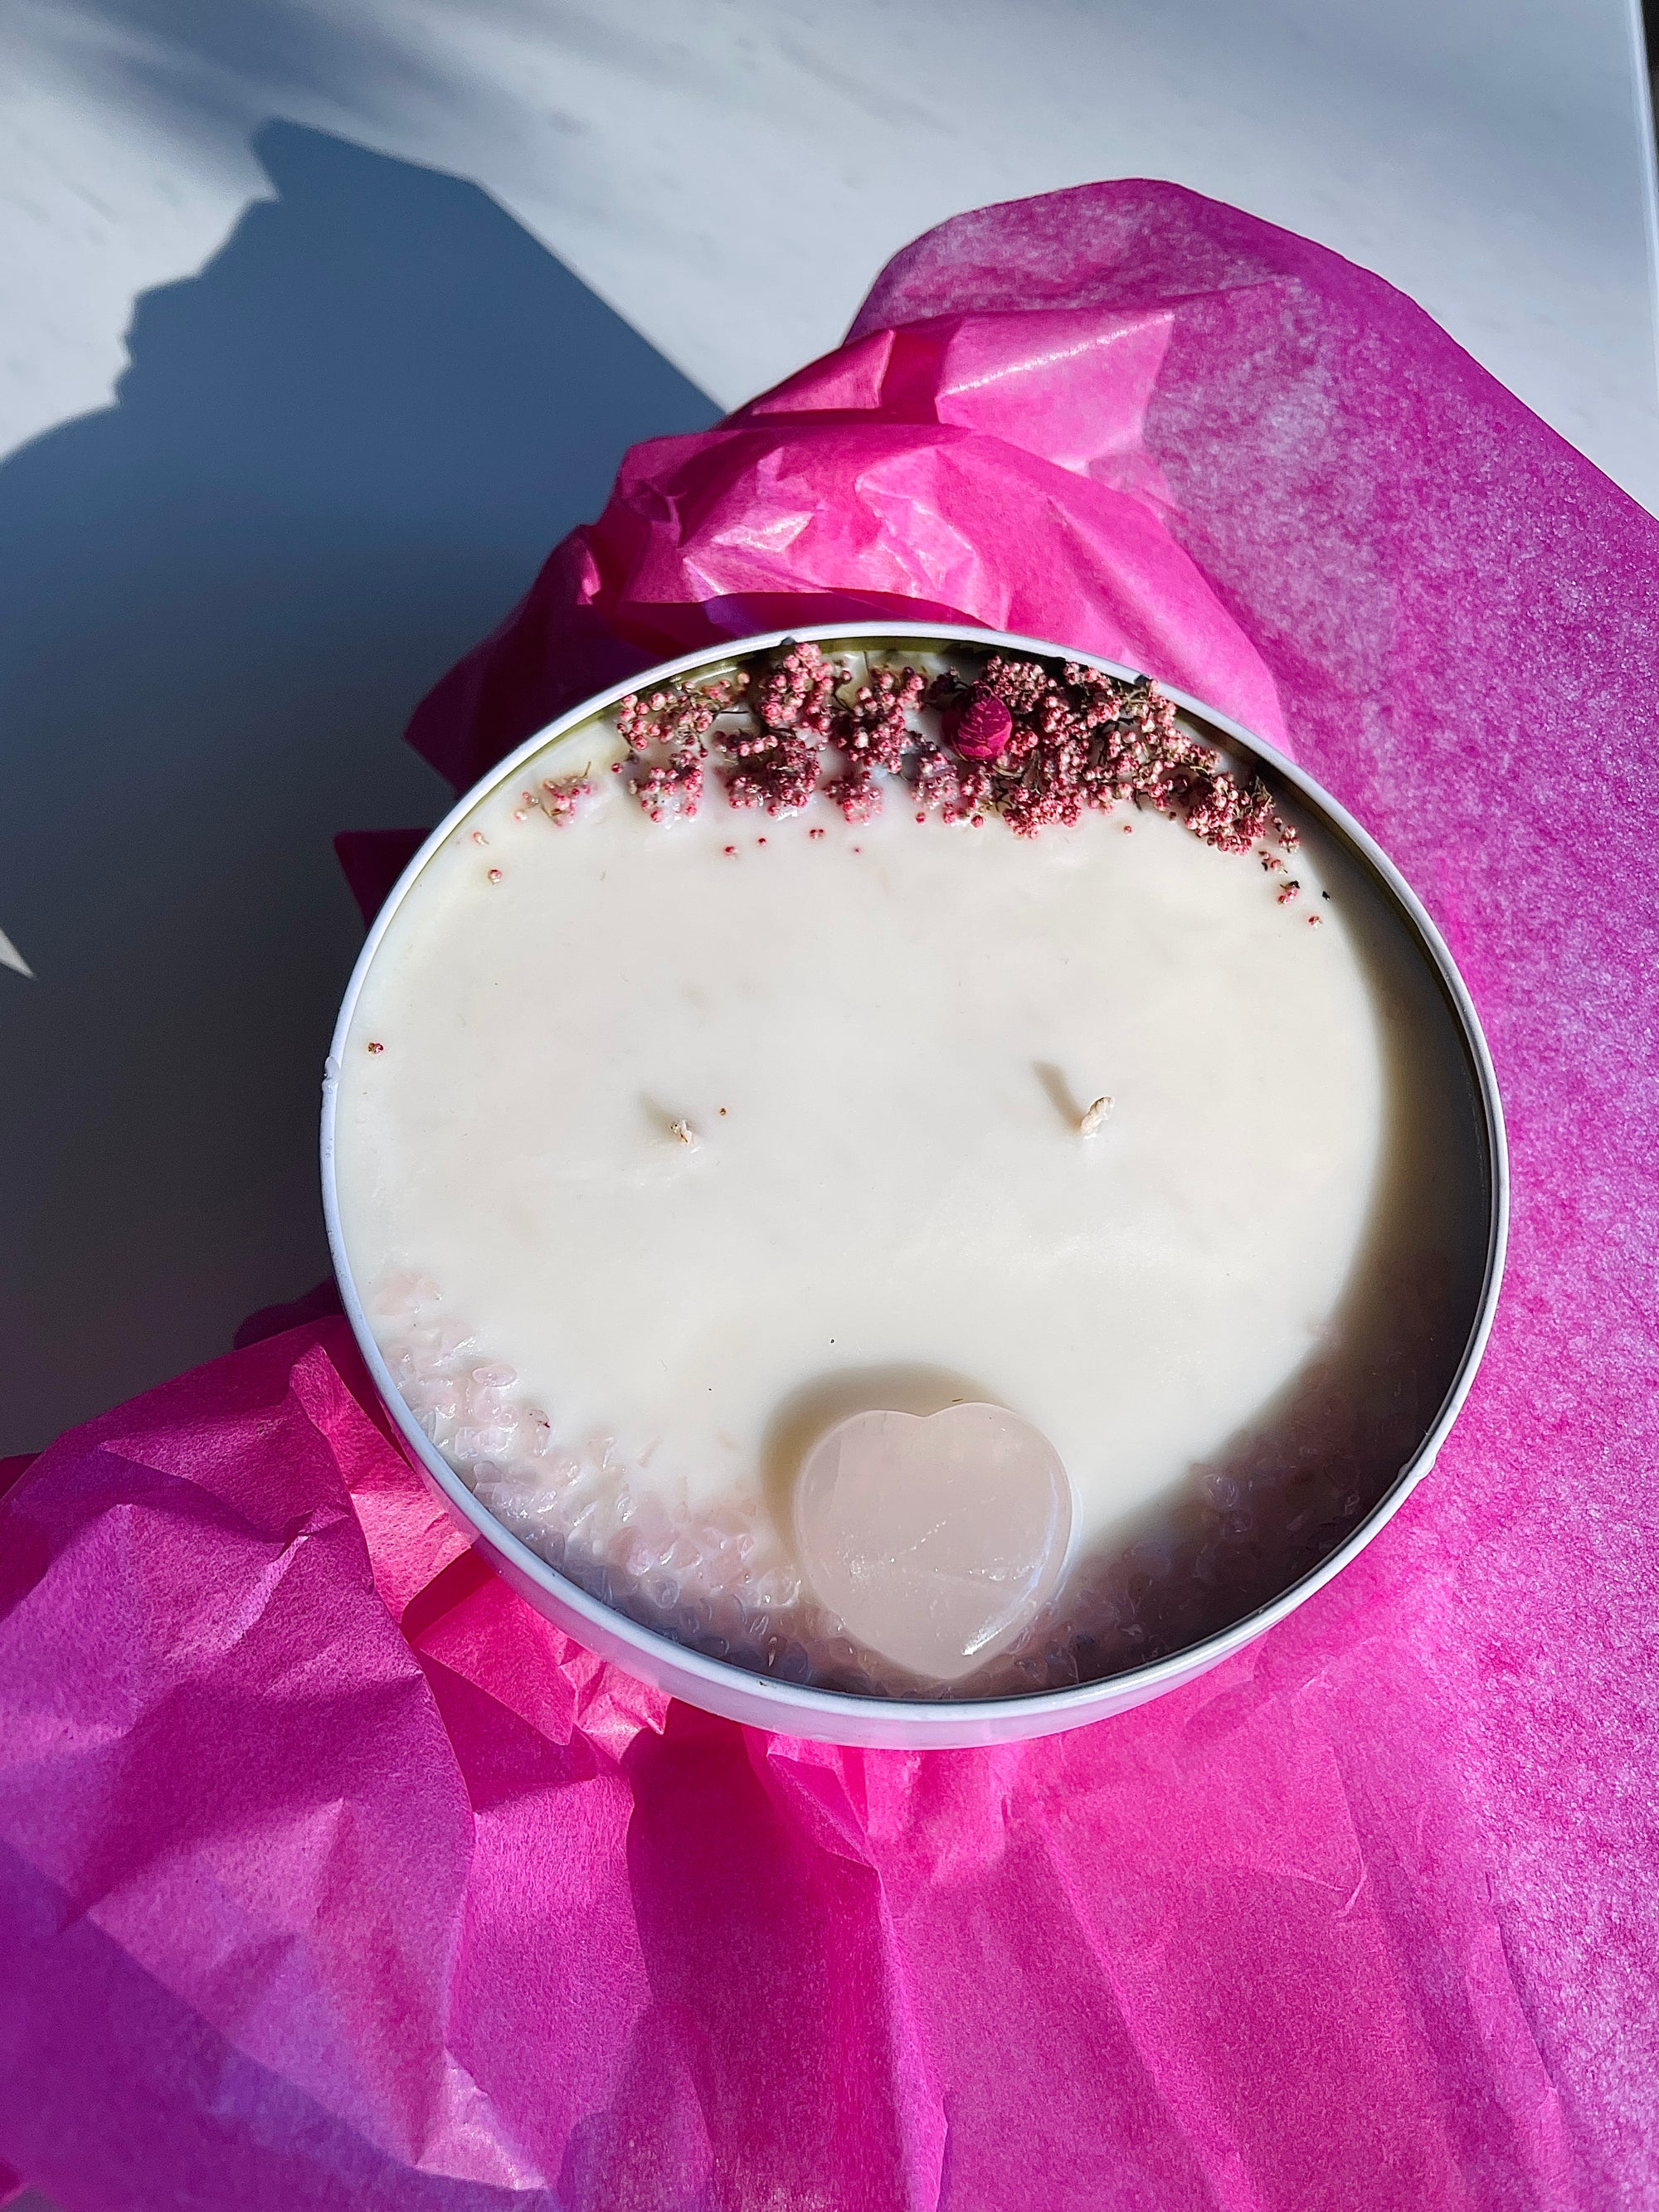 “I feel happy being me” Rose Quartz Candle